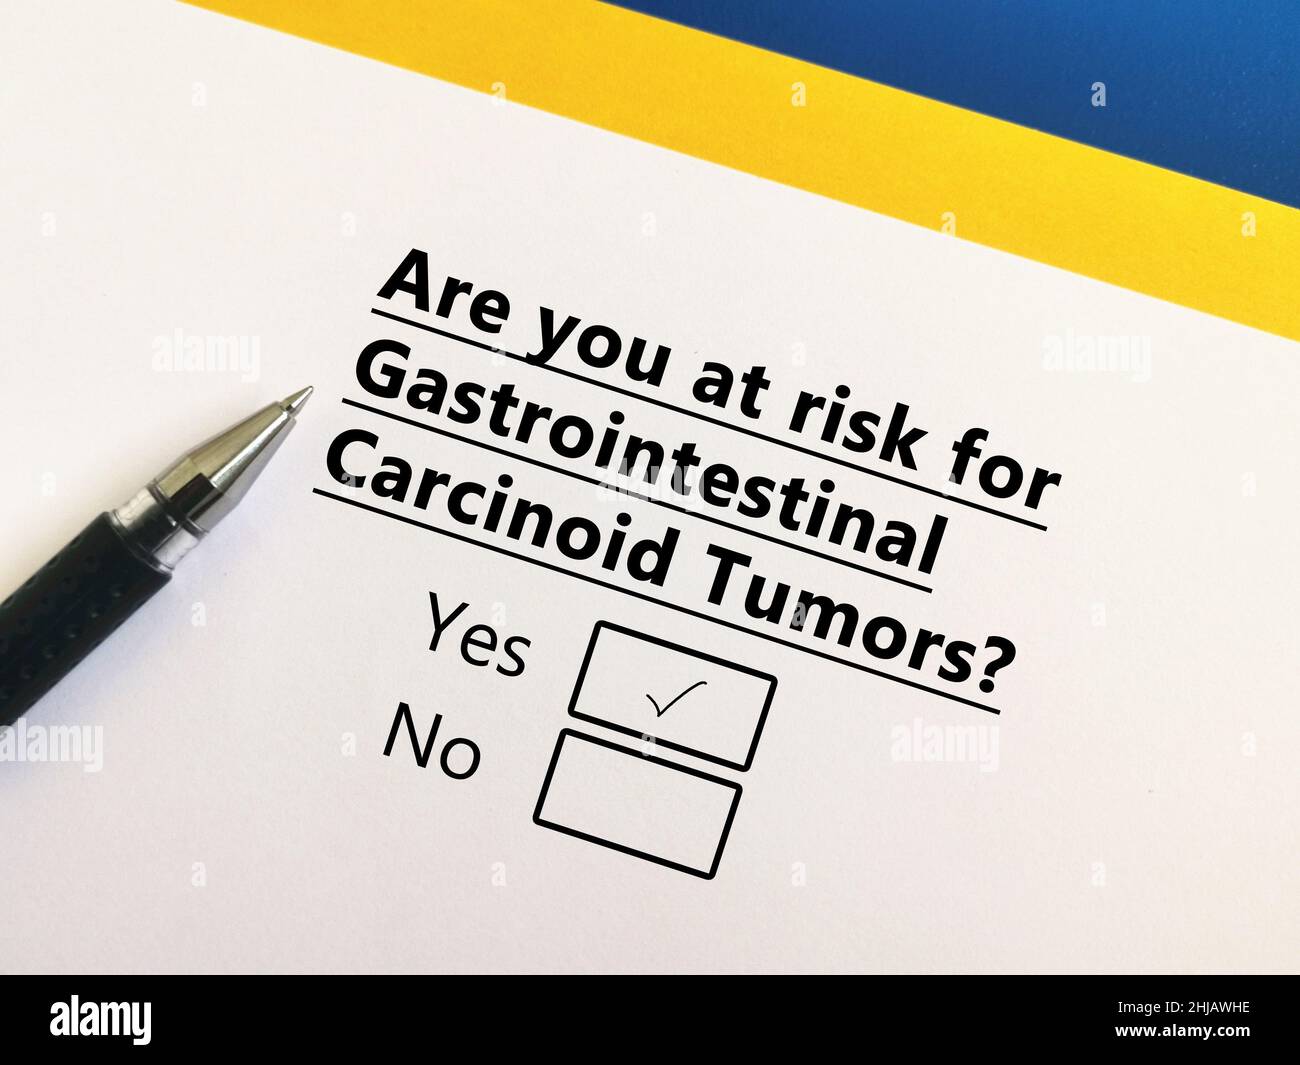 One person is answering question about cancer risk. He is at risk for gastrointestinal carcinoid tumours. Stock Photo